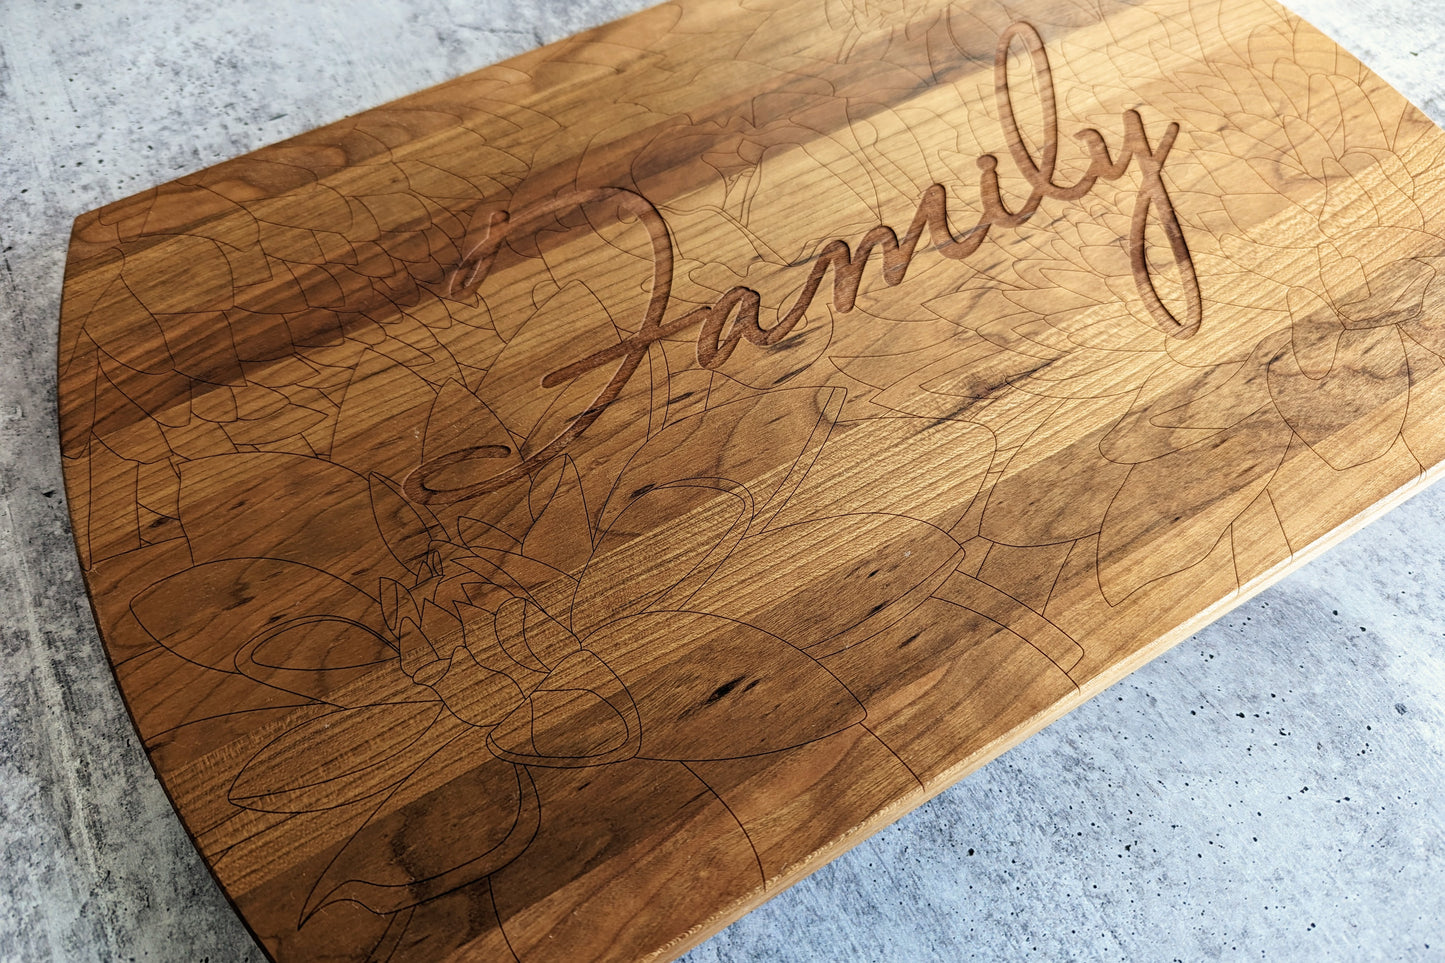 Close up view of a solid cherry wood cutting board with floral markings and the word Family engraved in the center to show the floral marking in detail.